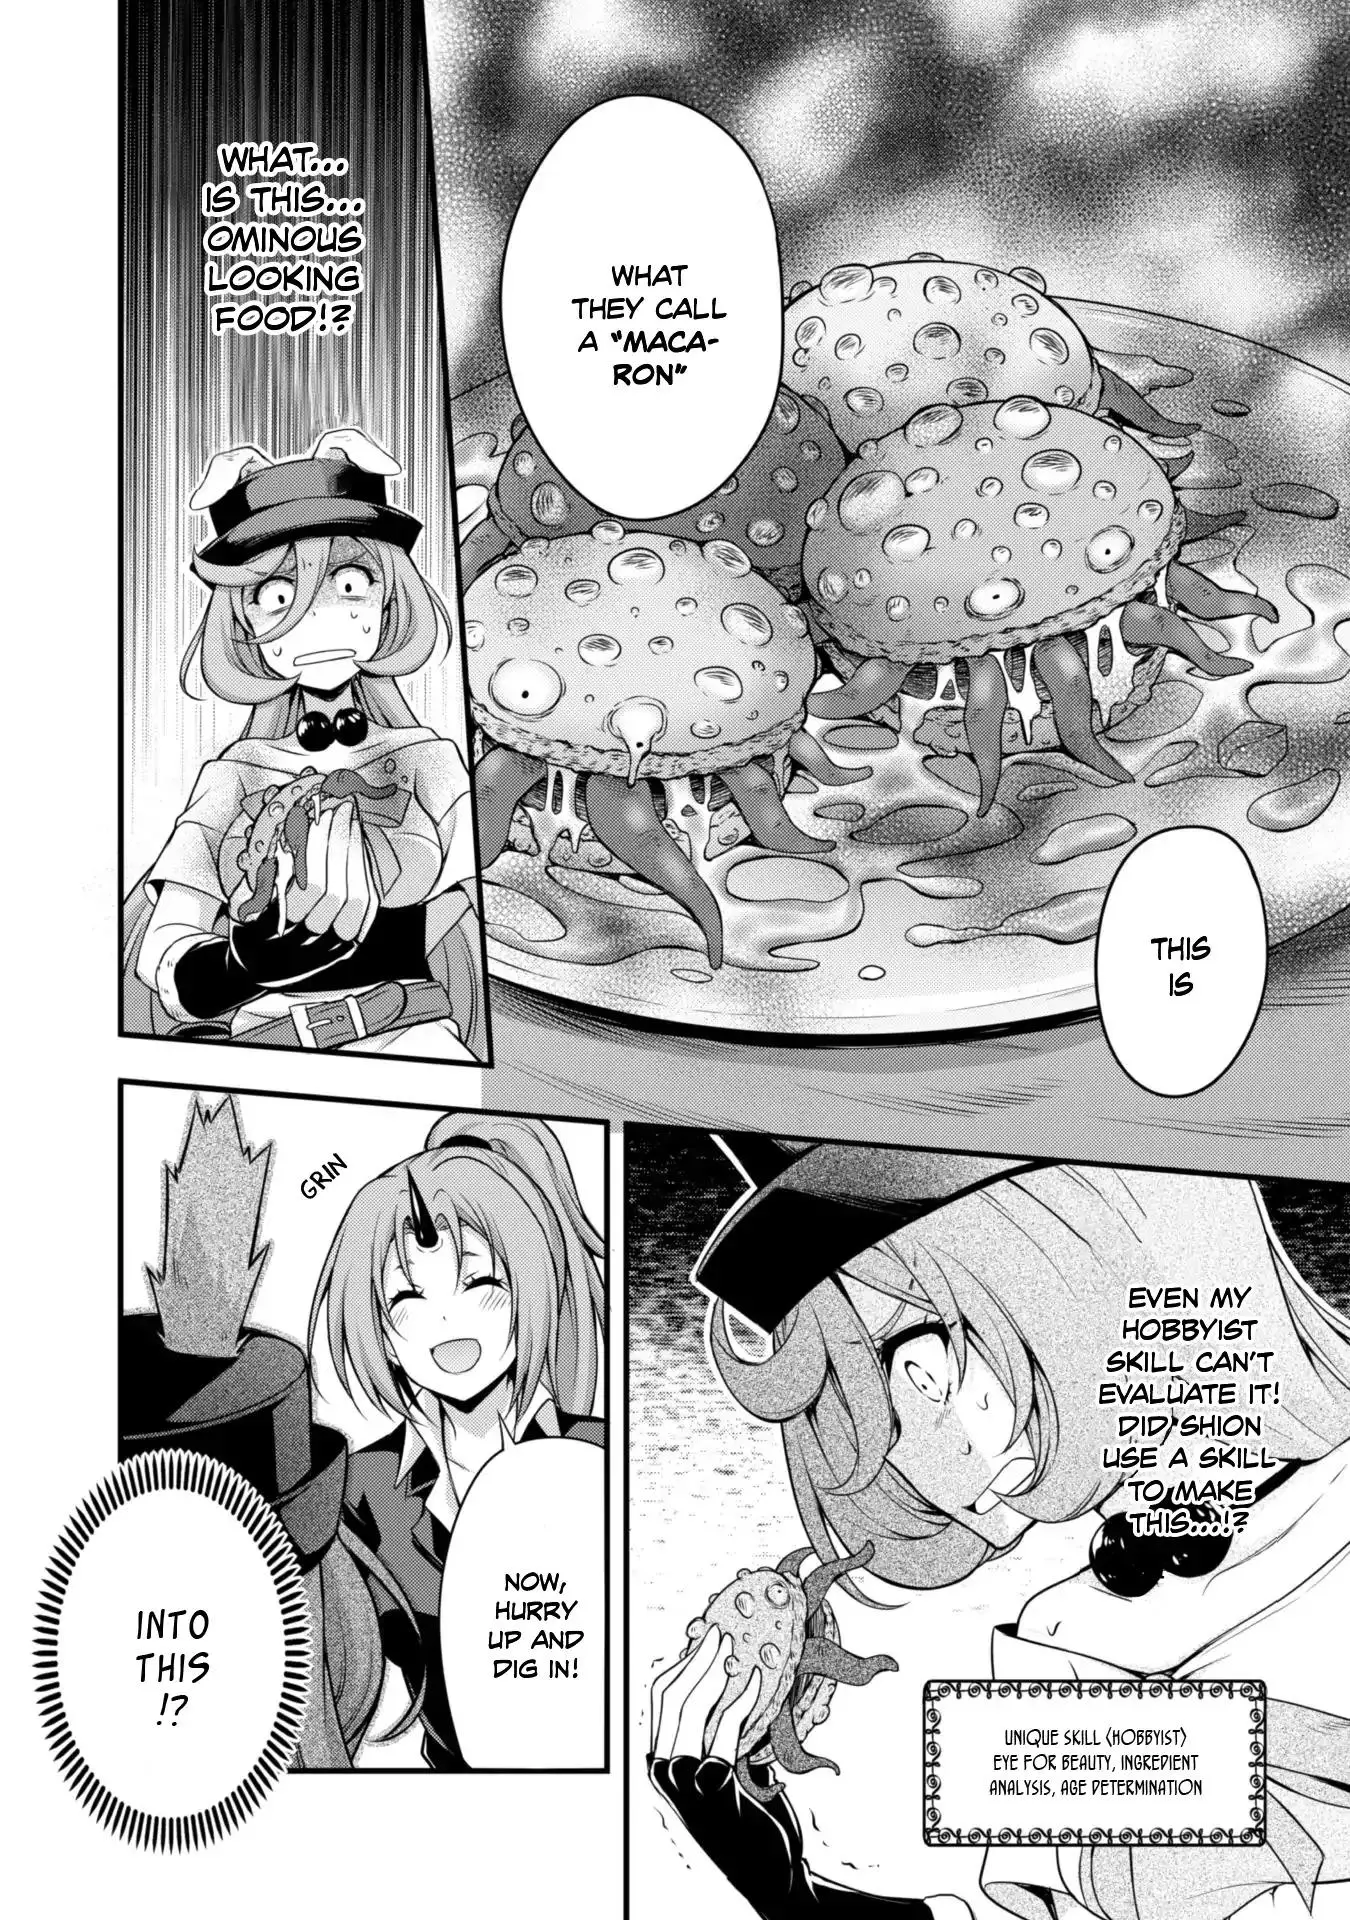 Tensei Shitara Slime Datta Ken: The Ways of Strolling in the Demon Country - 10 page 7